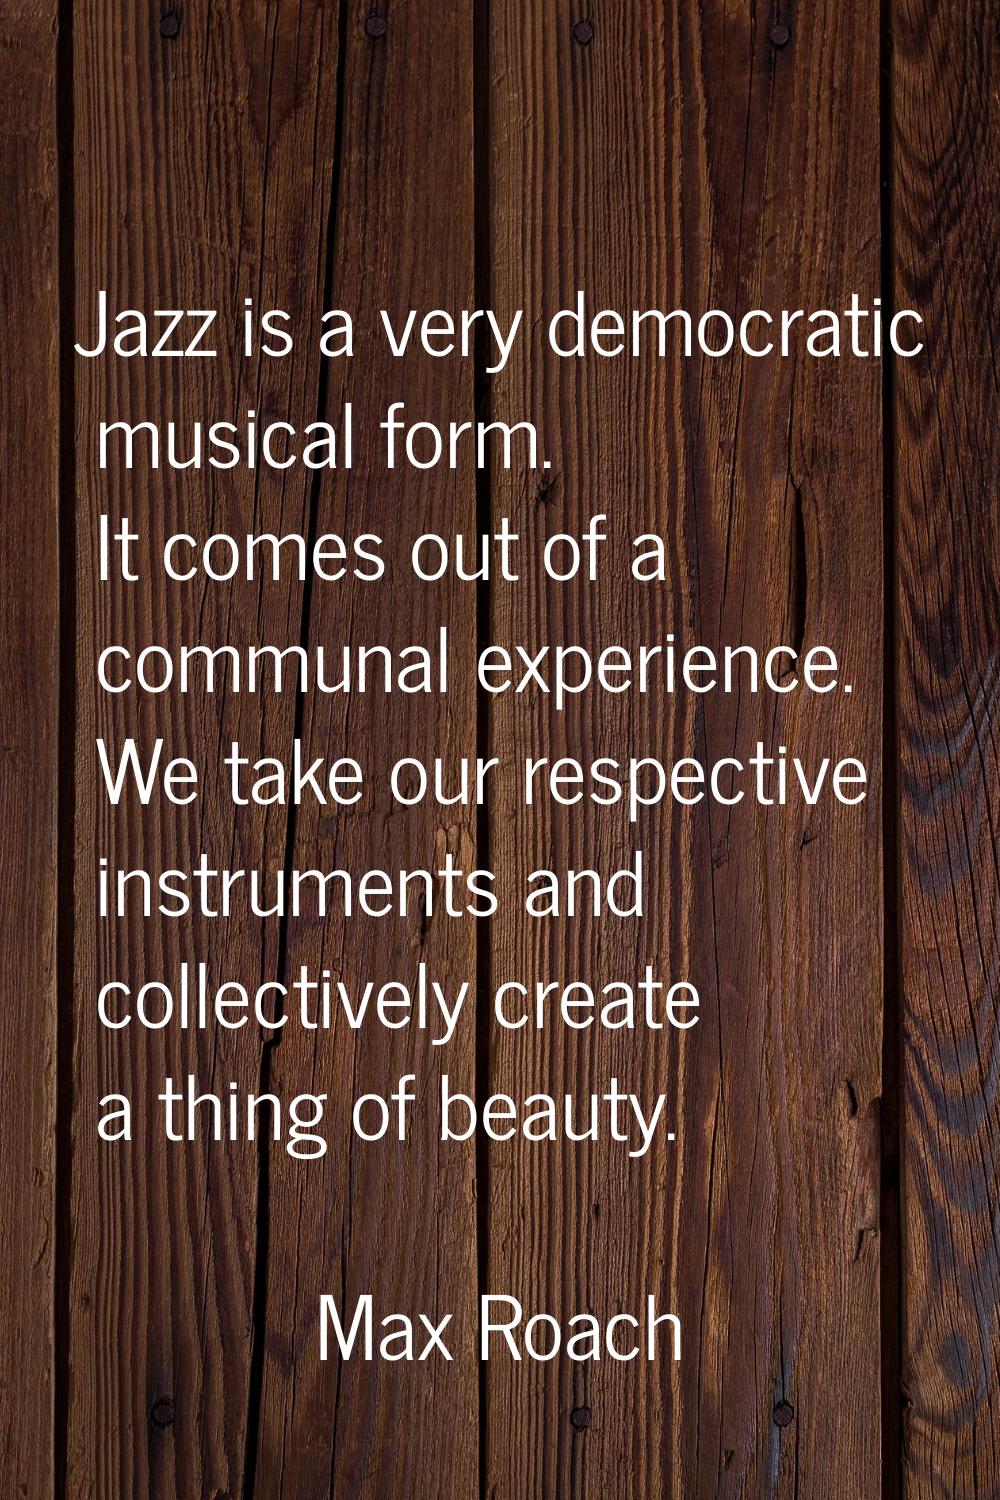 Jazz is a very democratic musical form. It comes out of a communal experience. We take our respecti